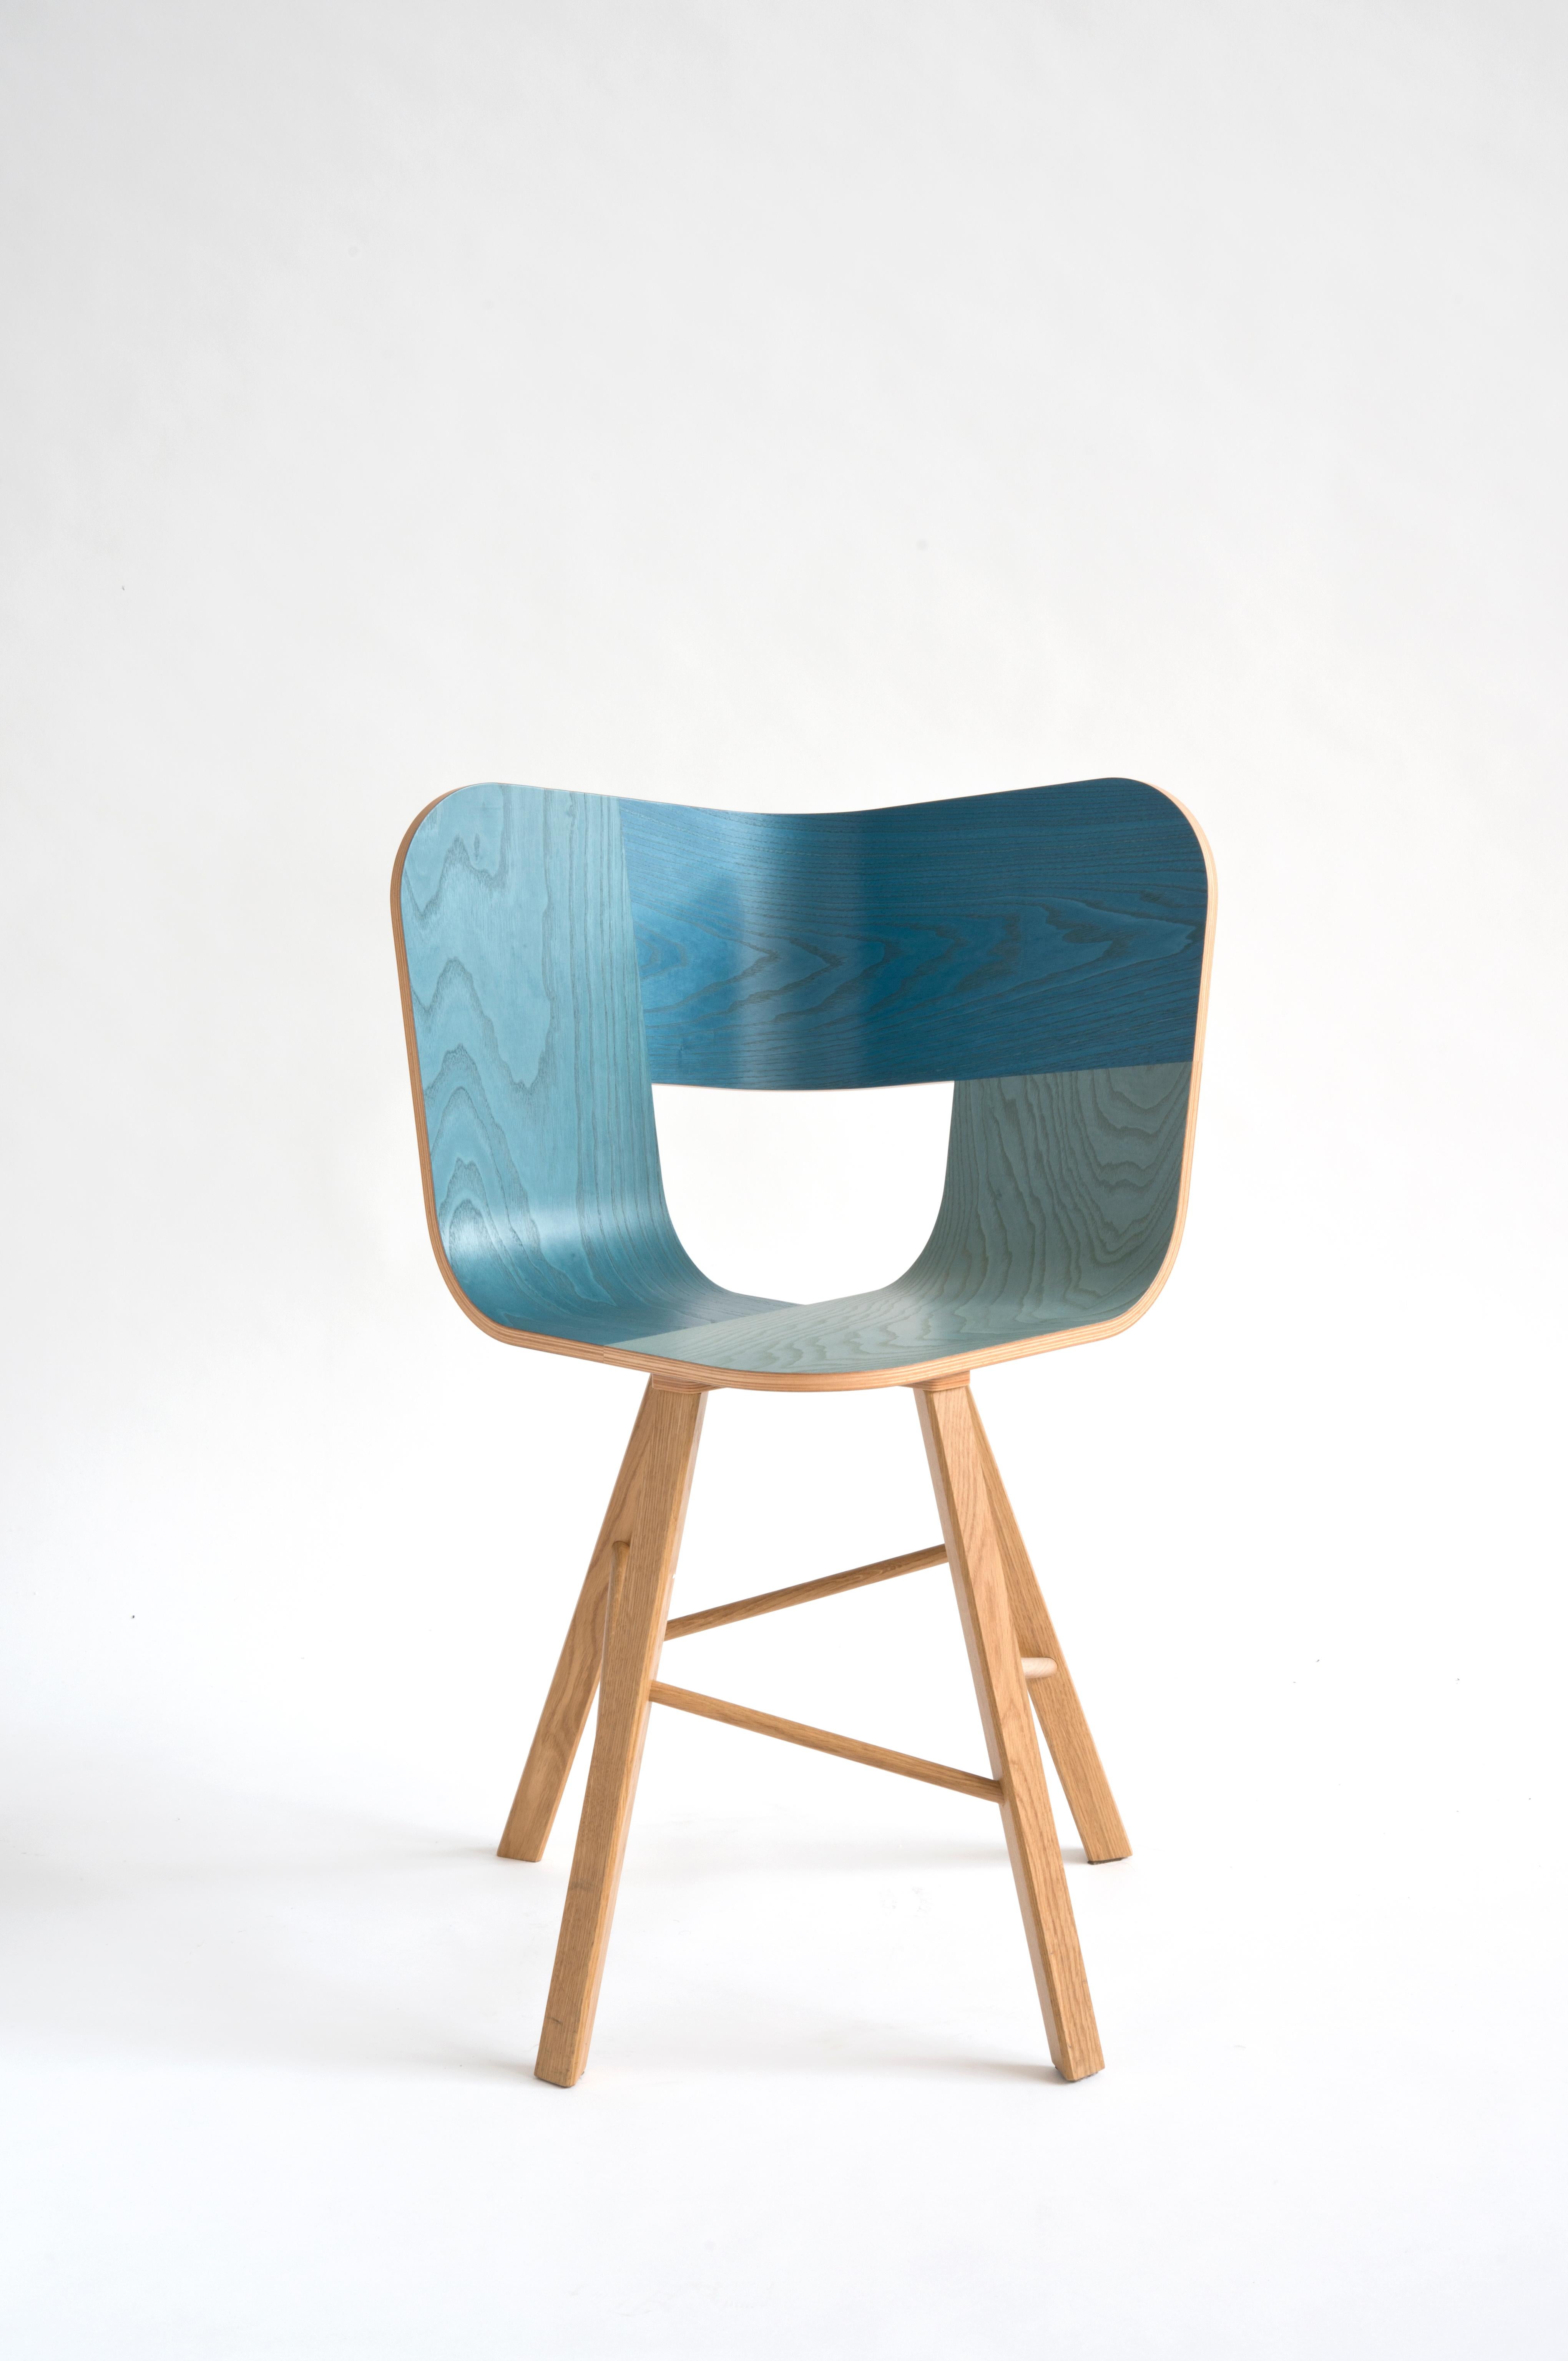 Set of 2, Tria wood 4 legs chair, Denim by Colé Italia with Lorenz & Kaz
(RAL color seat - RAL color painted legs)
Dimensions: H 82.5, D 52, W 61 cm
Materials: Plywood chair; 4 legs solid oak base

Also Available: Tria; 3 Legs, with Cushion,